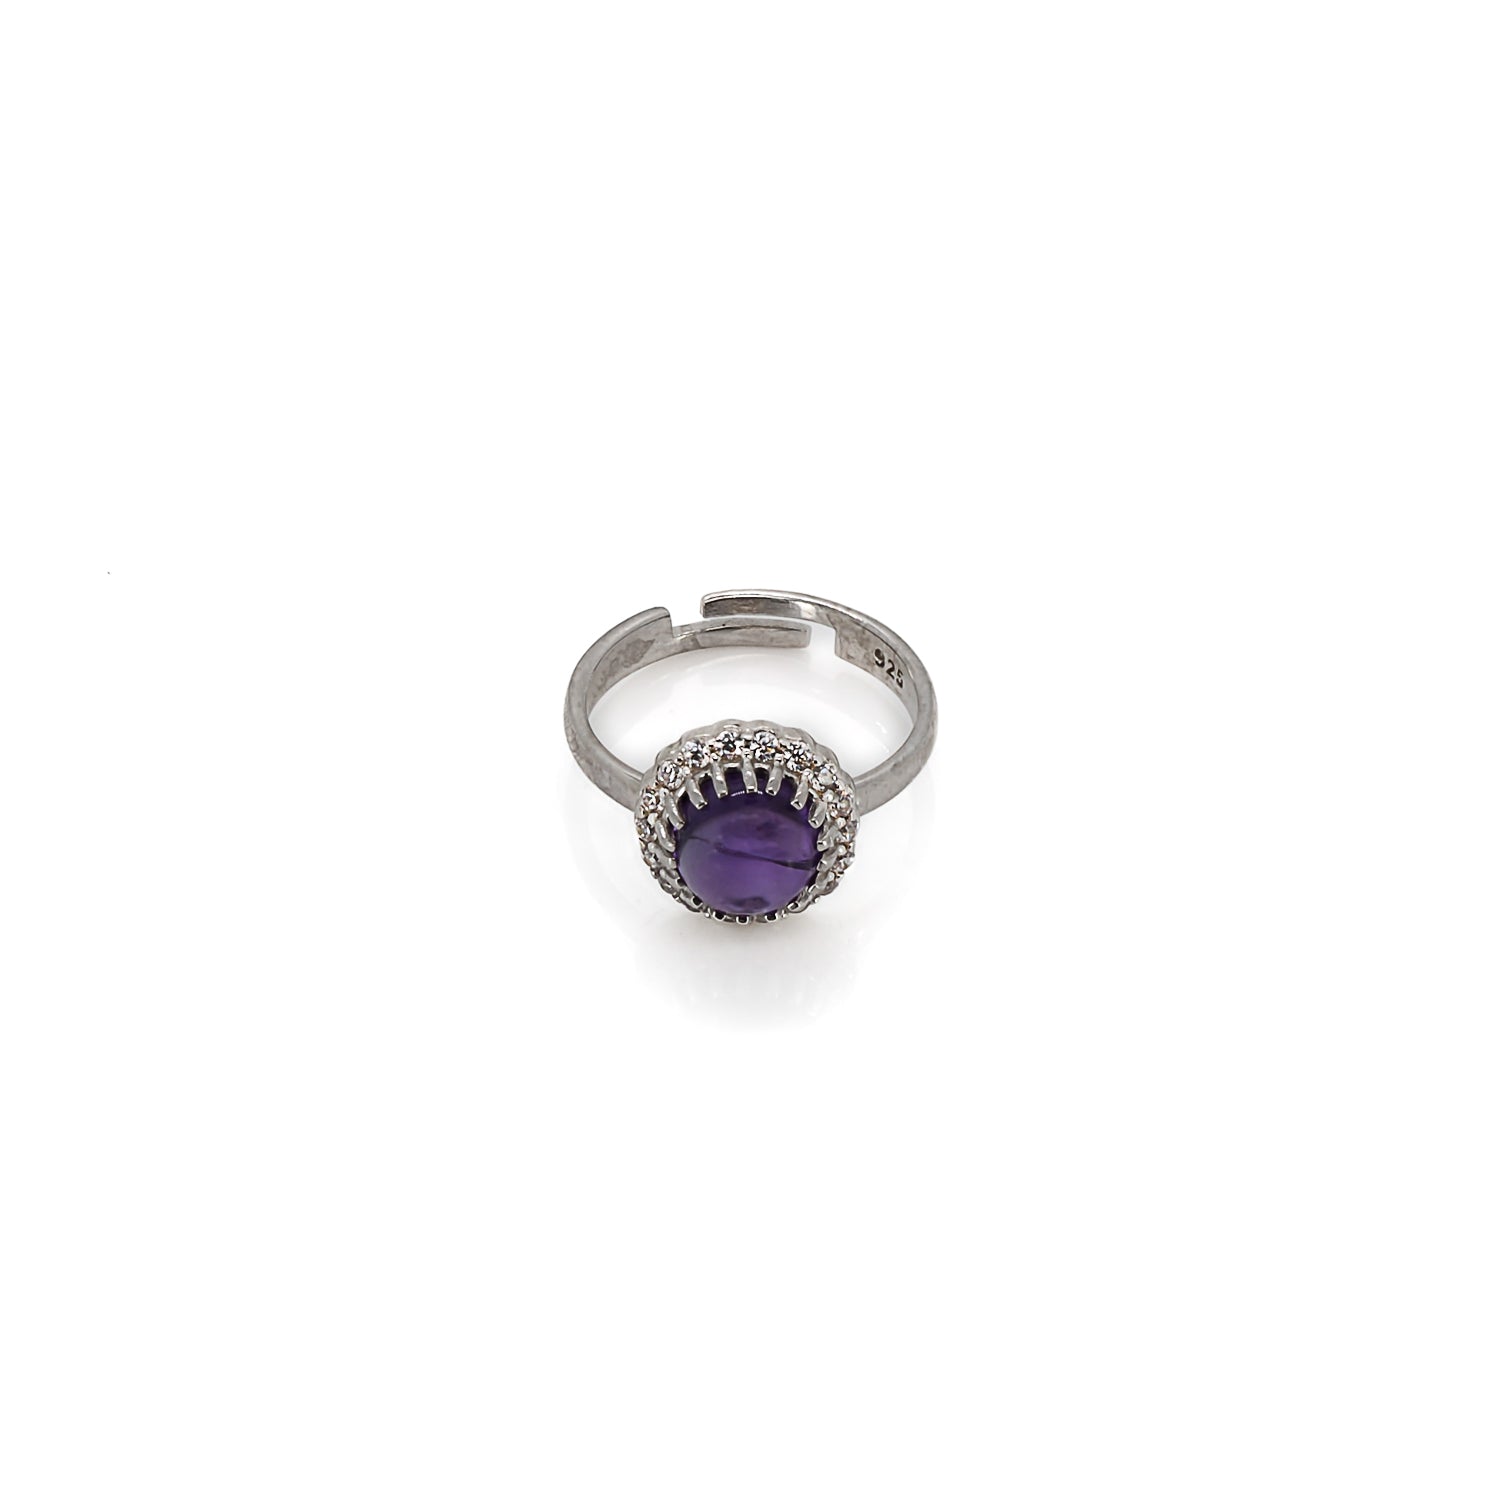 Tranquil Lavender Amethyst Ring - Serene and Stylish